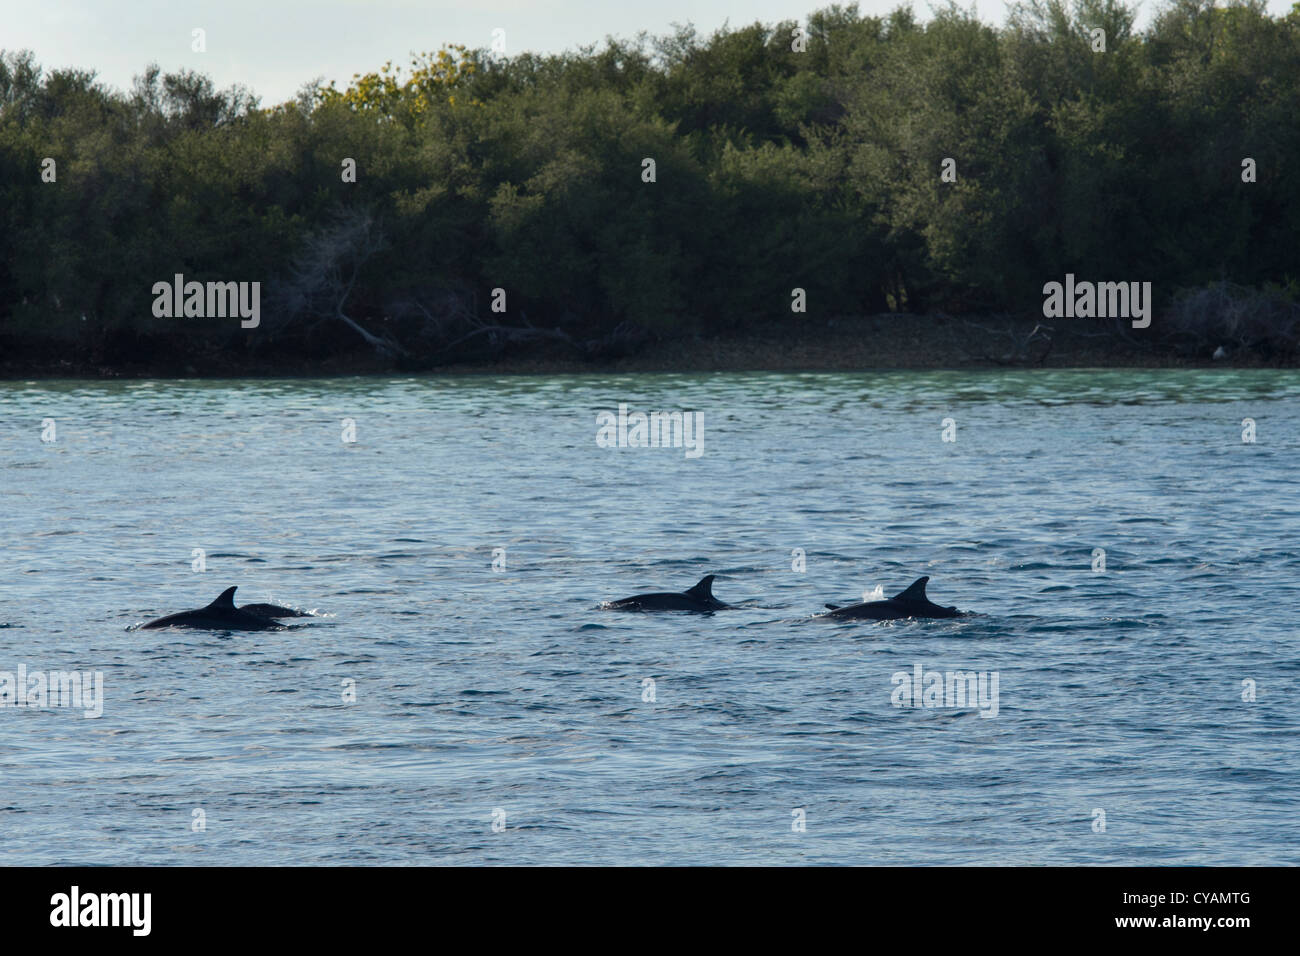 Hawaiian/Grays Spinner Dolphin, Stenella longirostris, group surfacing in front of island. Maldives, Indian Ocean. Stock Photo